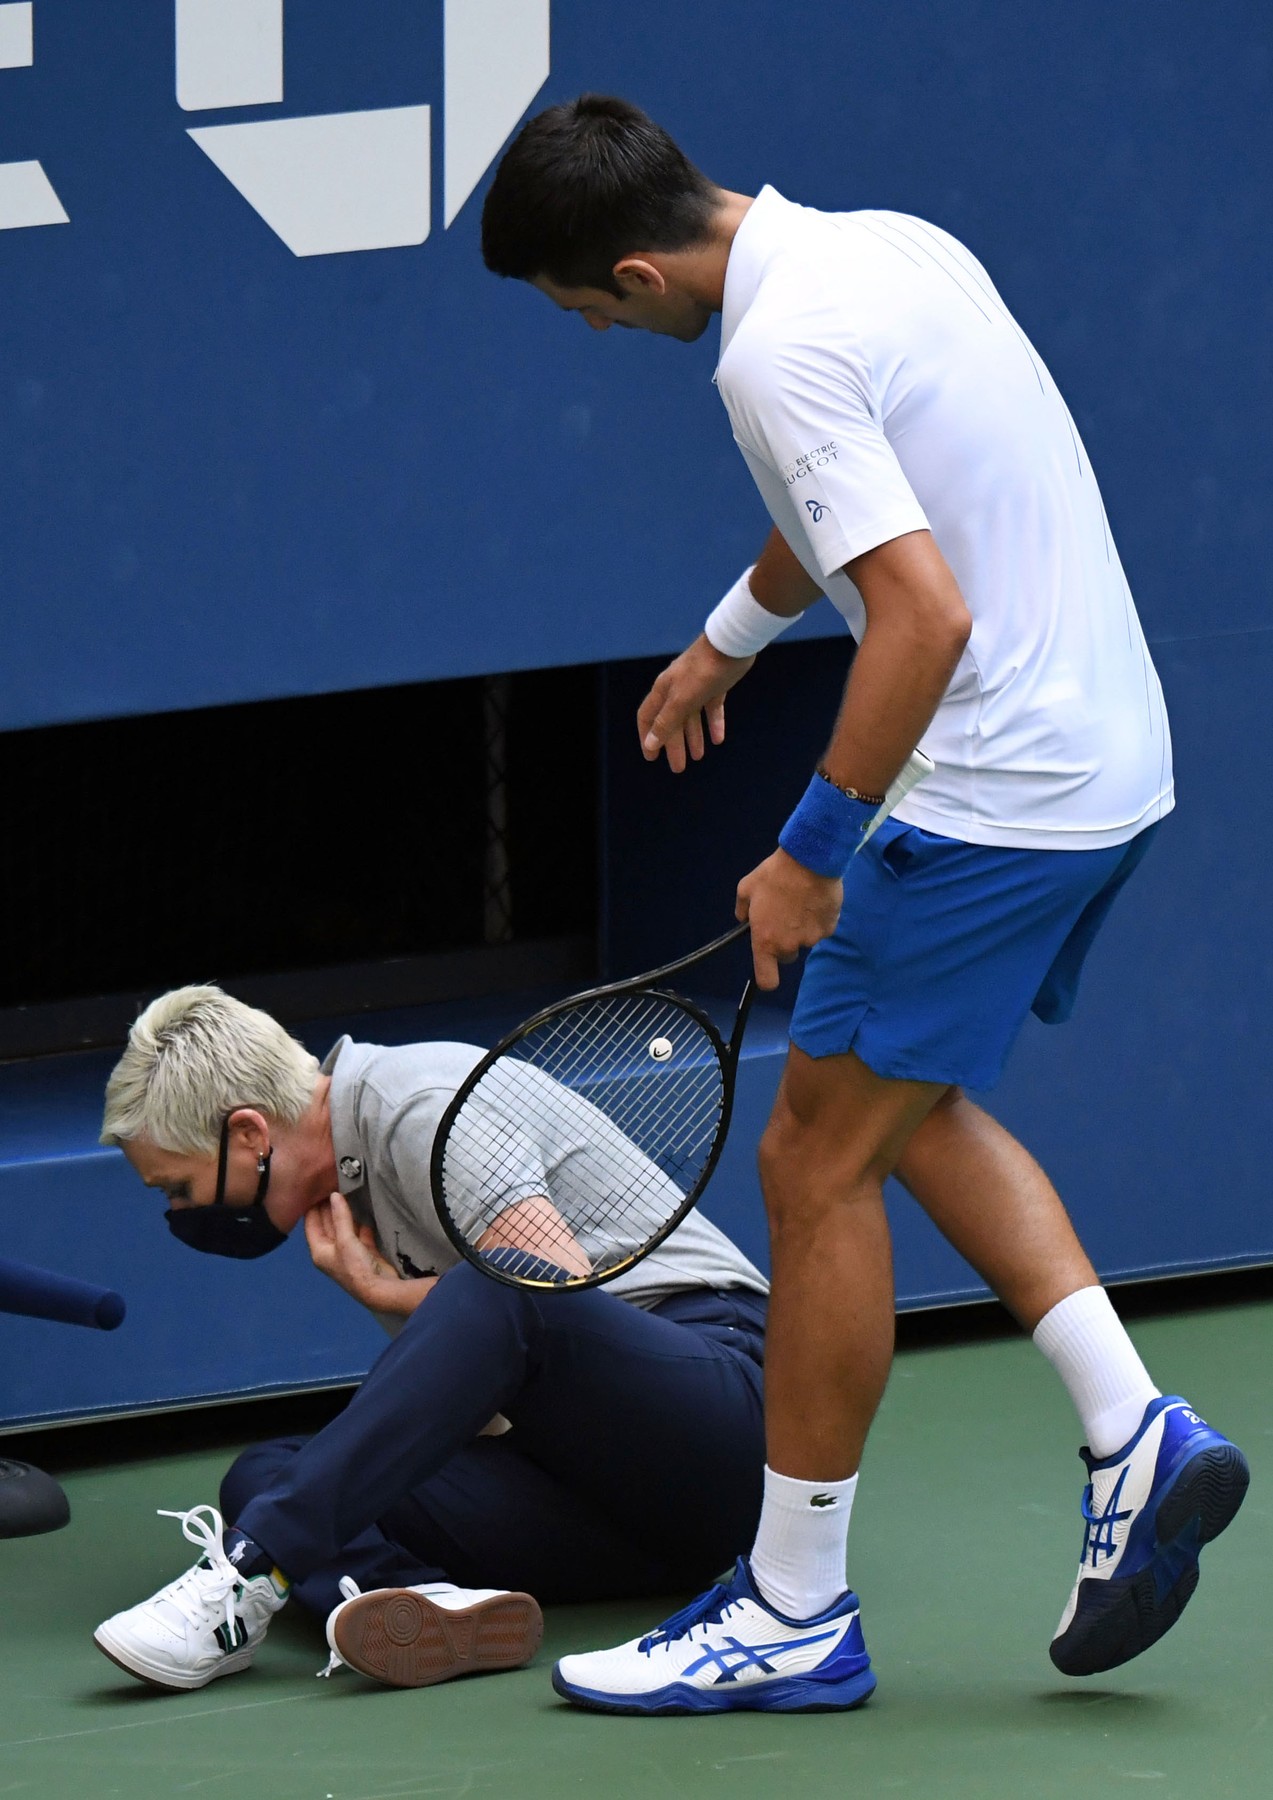 Sep 6, 2020; Flushing Meadows, New York, USA; Novak Djokovic of Serbia checks on a line judge after he unintentionally hit her with a tennis ball after losing a game to Pablo Carreno Busta of Spain (not pictured) on day seven of the 2020 U.S. Open tennis tournament at USTA Billie Jean King National Tennis Center.,Image: 556572205, License: Rights-managed, Restrictions: *** World Rights ***, Model Release: no, Credit line: USA TODAY Network / ddp USA / Profimedia